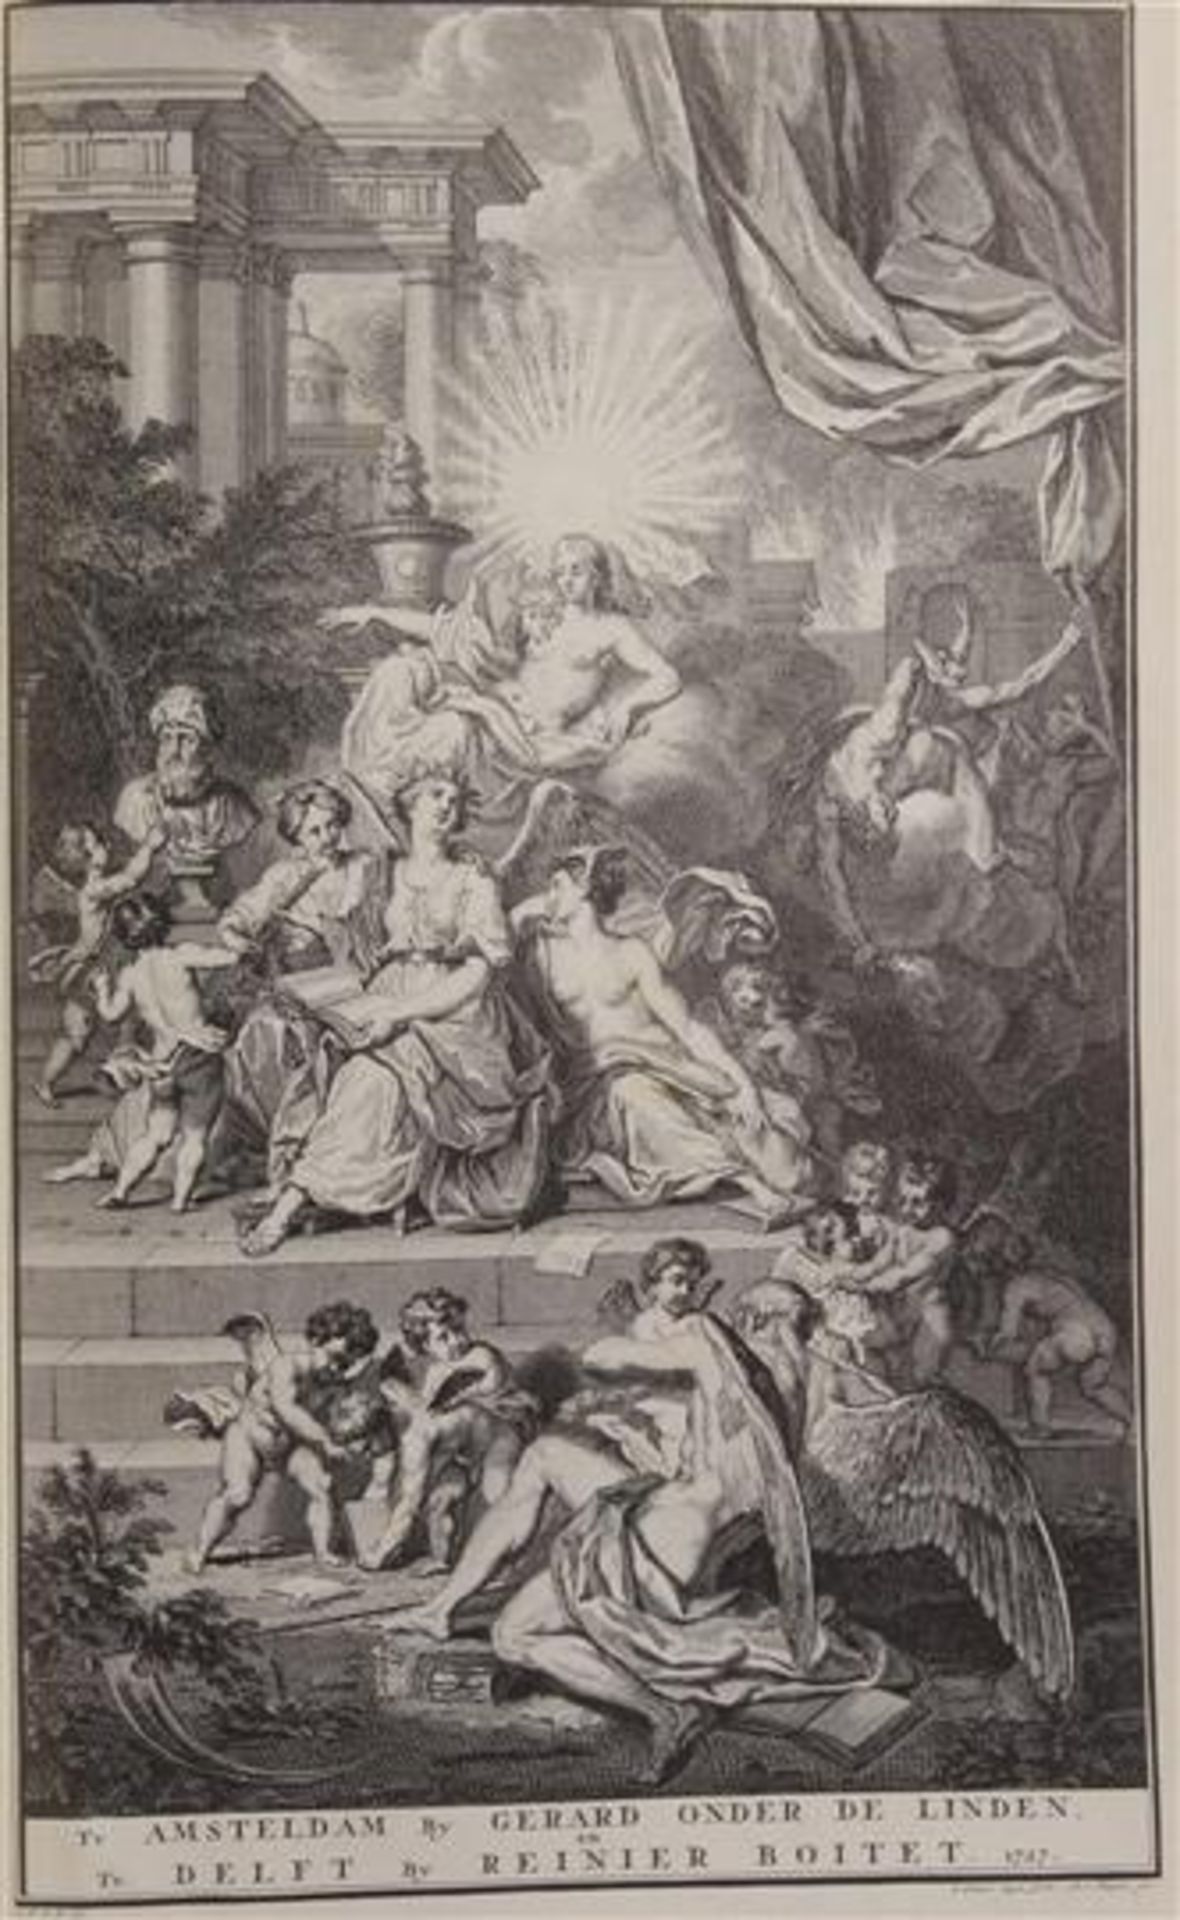 1988 reprint of the book "Sequel to Flavius Josephus by Jakob Basnage & nbsp; from 1726" - Image 2 of 3